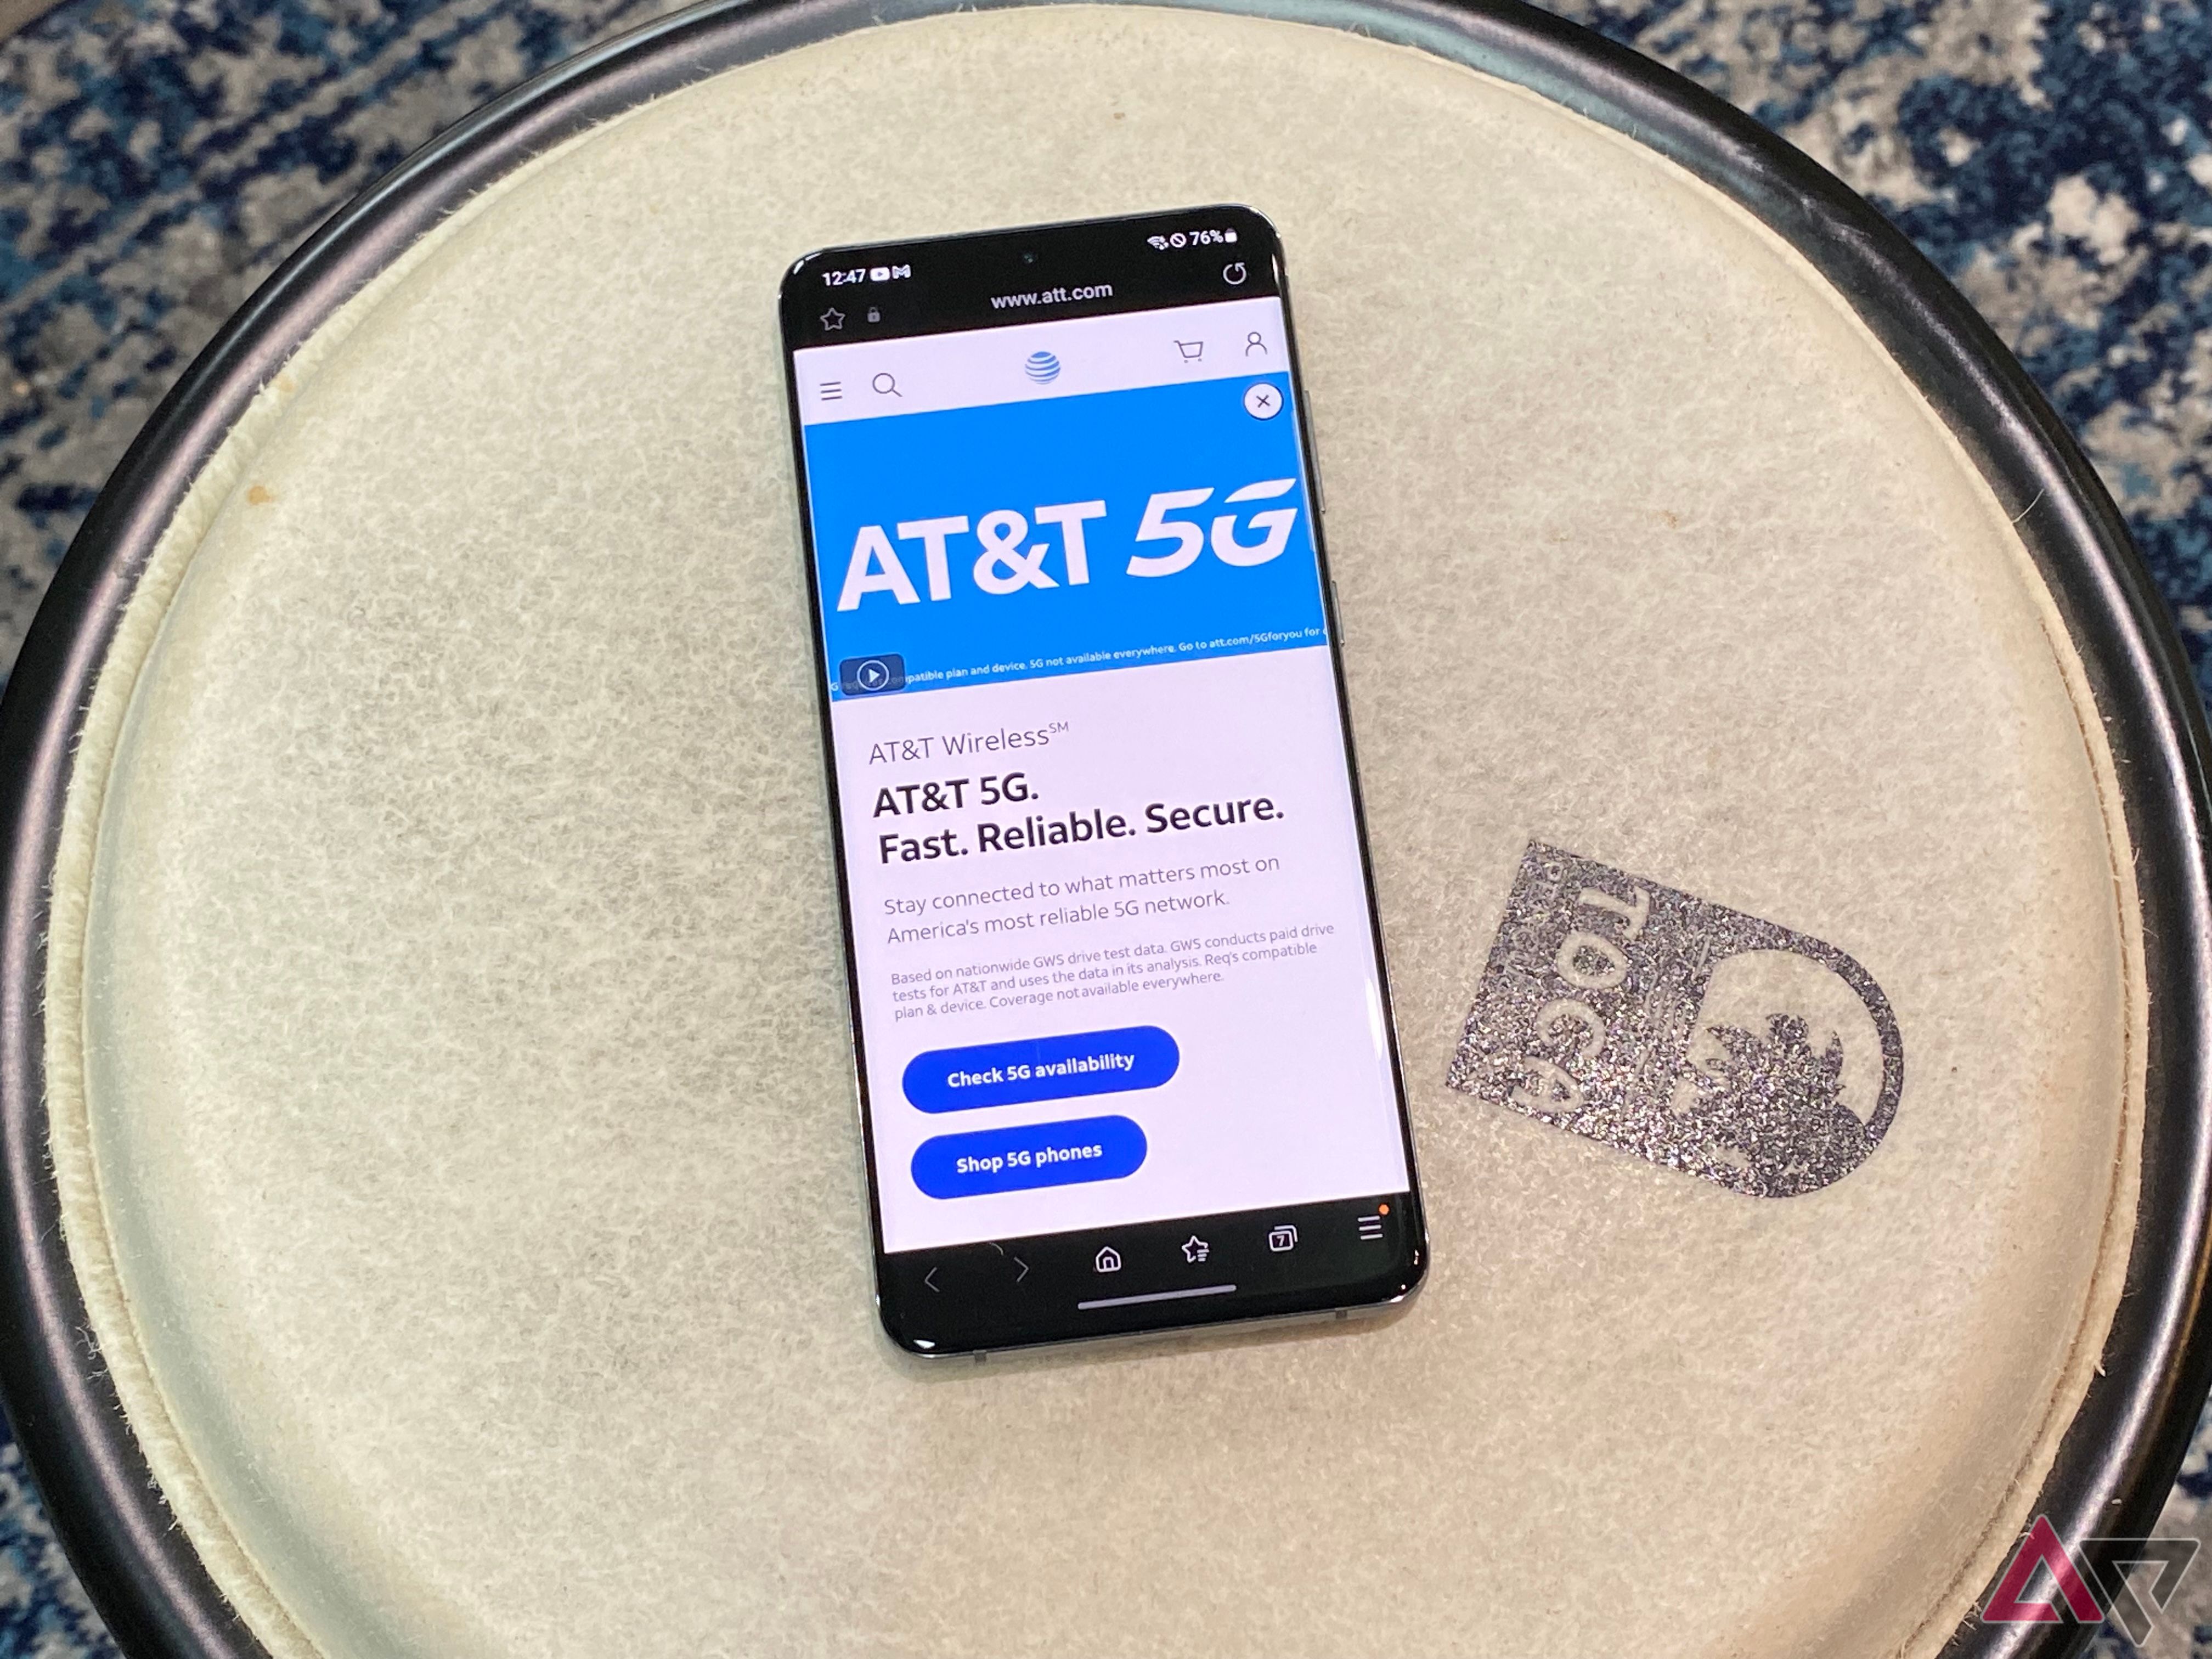 AT&T website on a phone on a drum